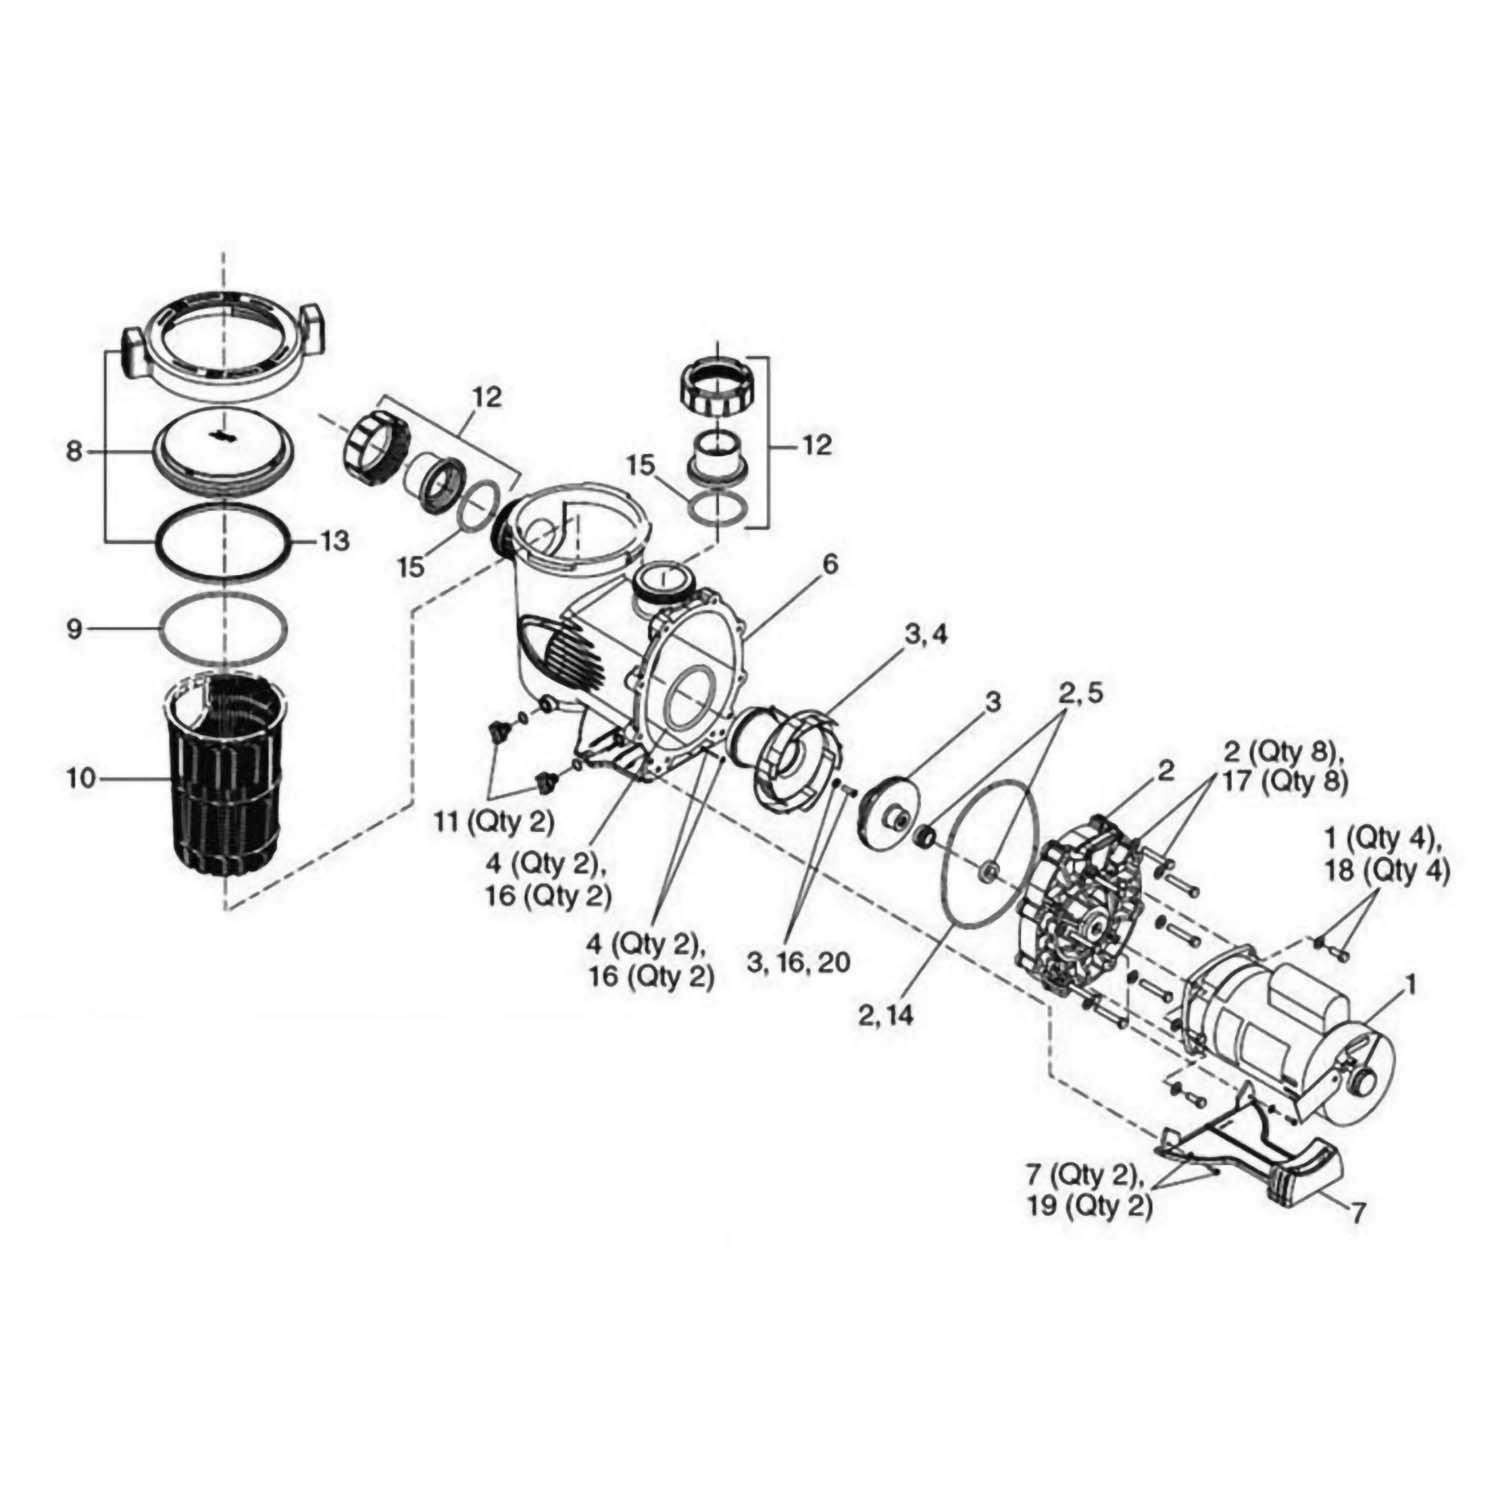 Jandy SHPF and SHPM Pump Lid Replacement Kit with O-ring | R0445800